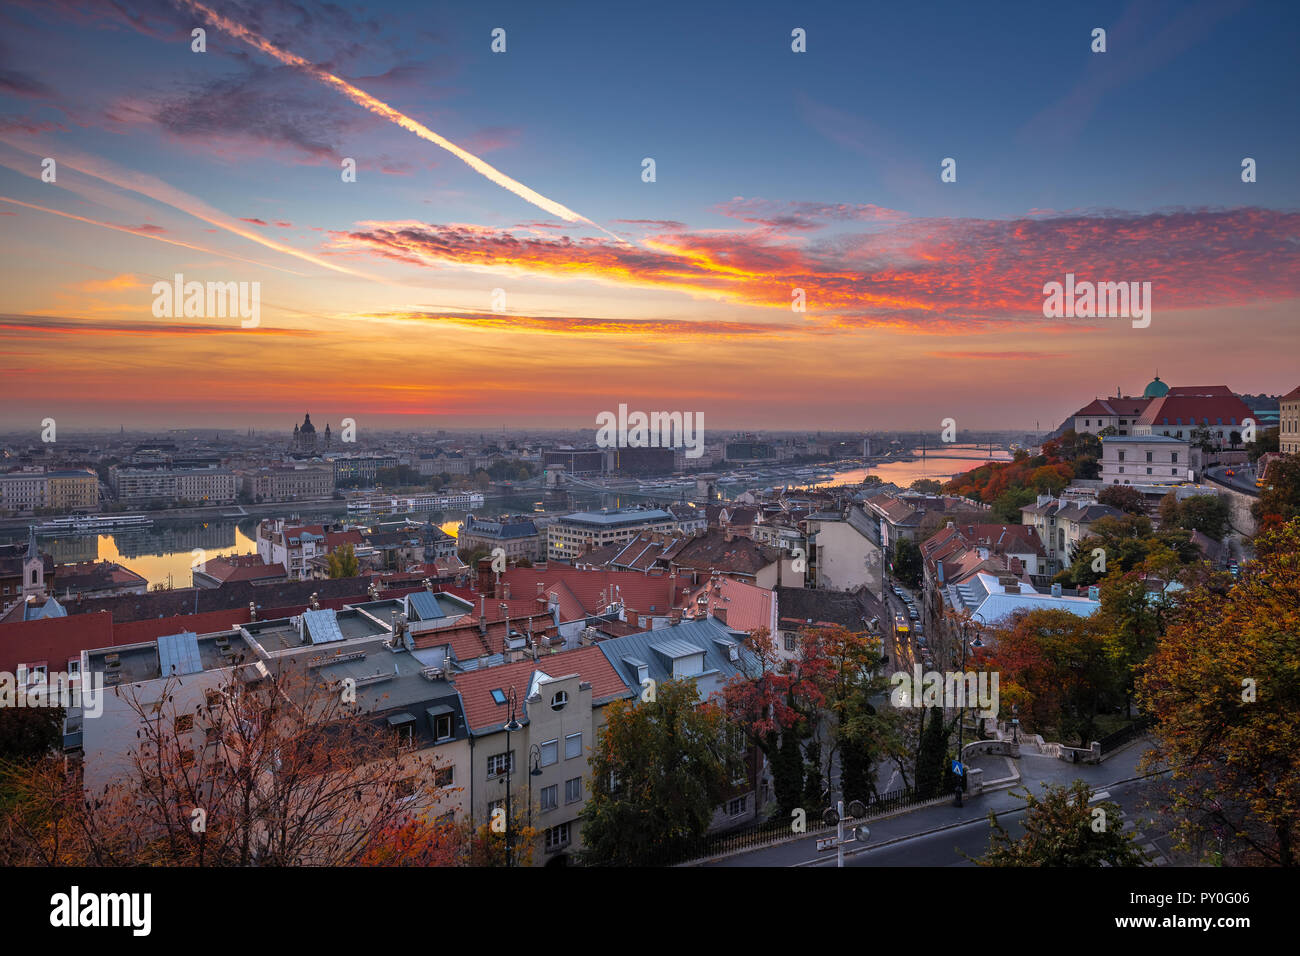 Budapest, Hungary - Aerial skyline view of Budapest at sunrise with beautiful colourful sky and autumn foliage Stock Photo